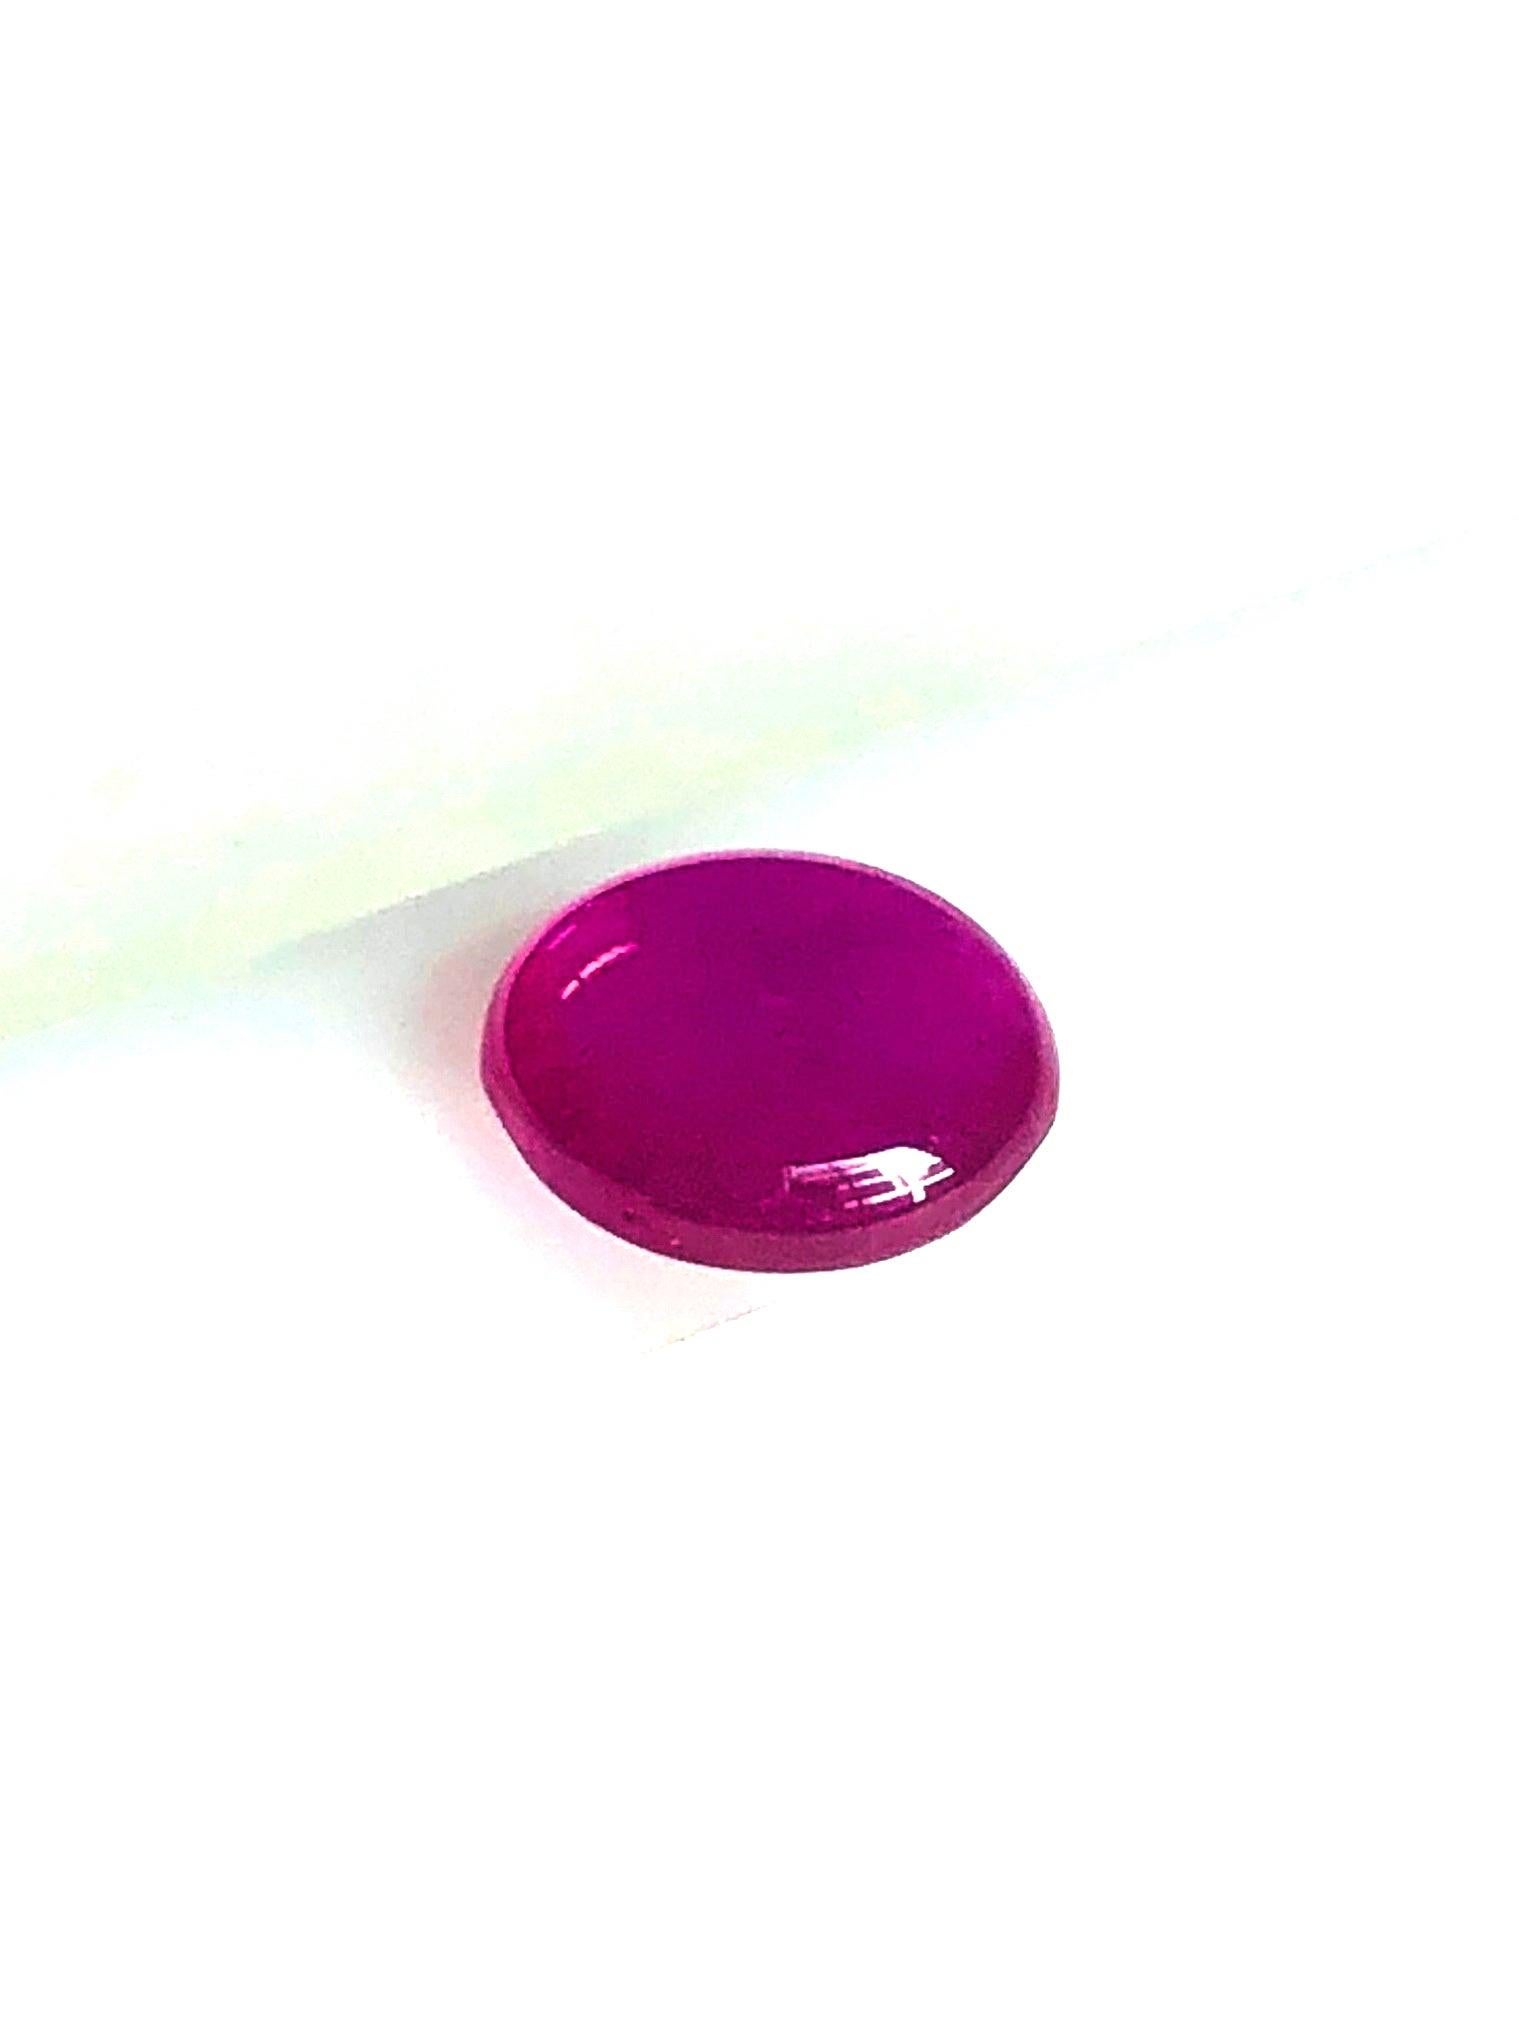 Cabochon Unheated 2.23 Carat Burmese Star Ruby, Unset Loose Gemstone, GIA Certified